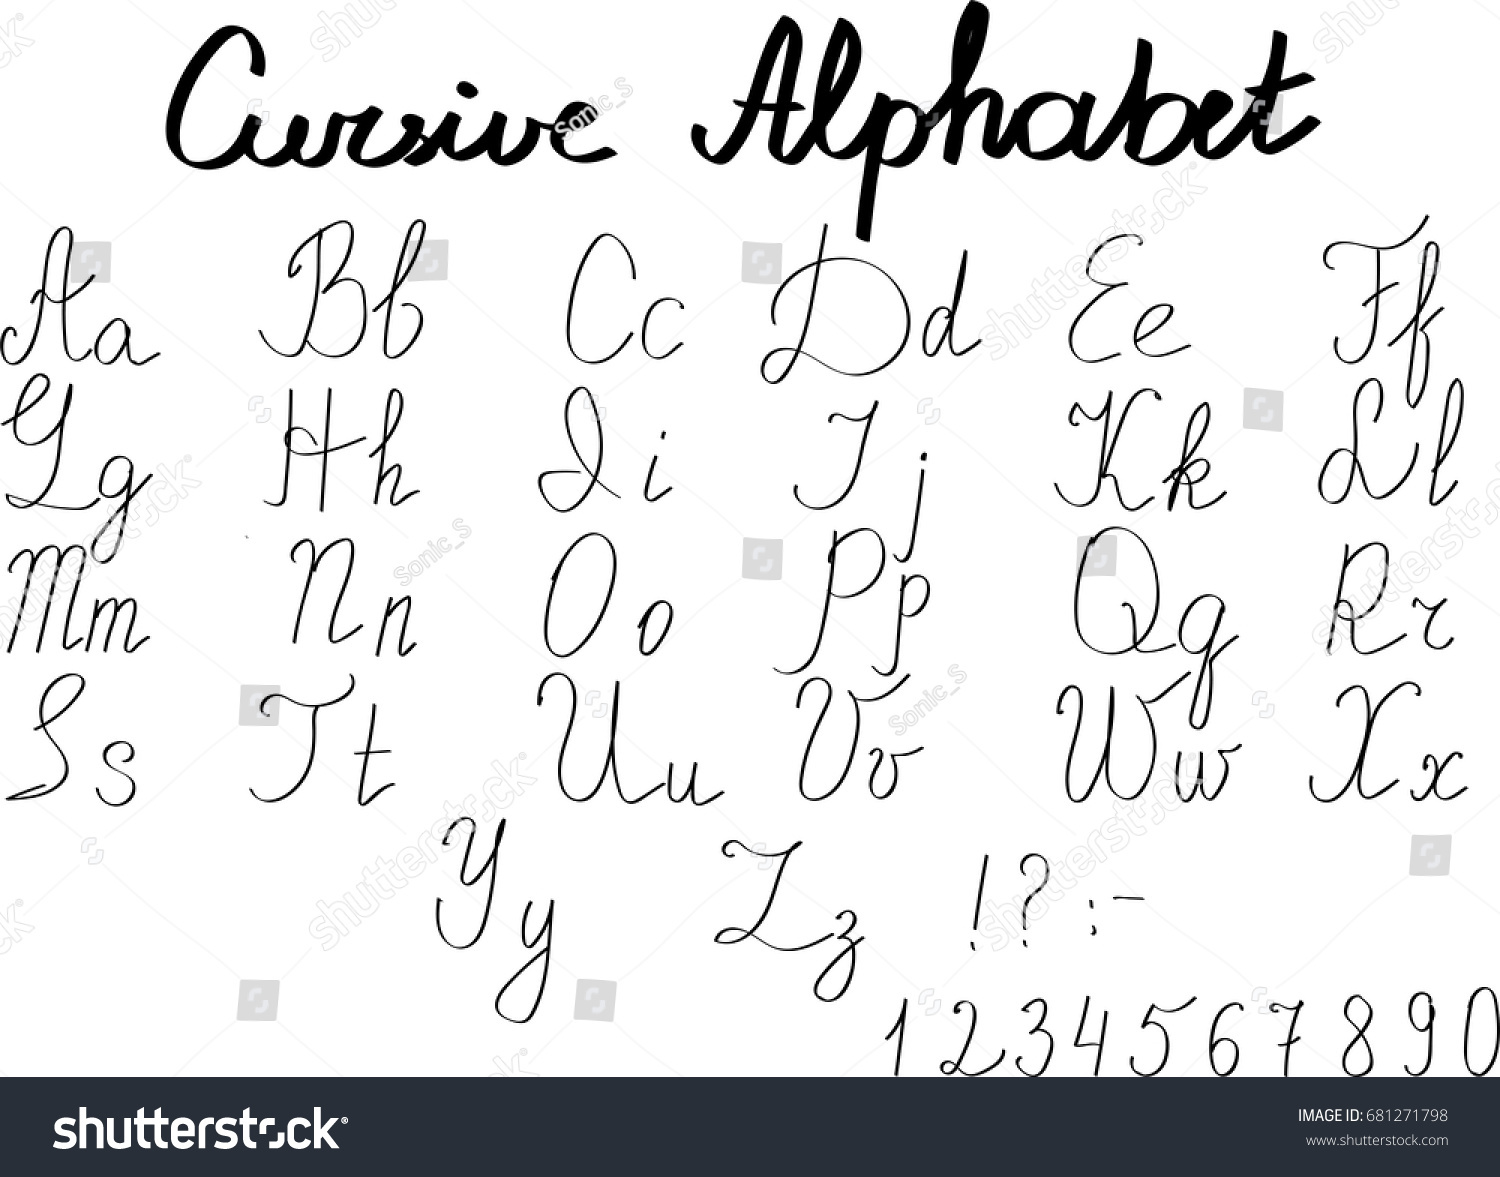 Cursive English Alphabet Letters Numbers Vector Stock Vector 681271798